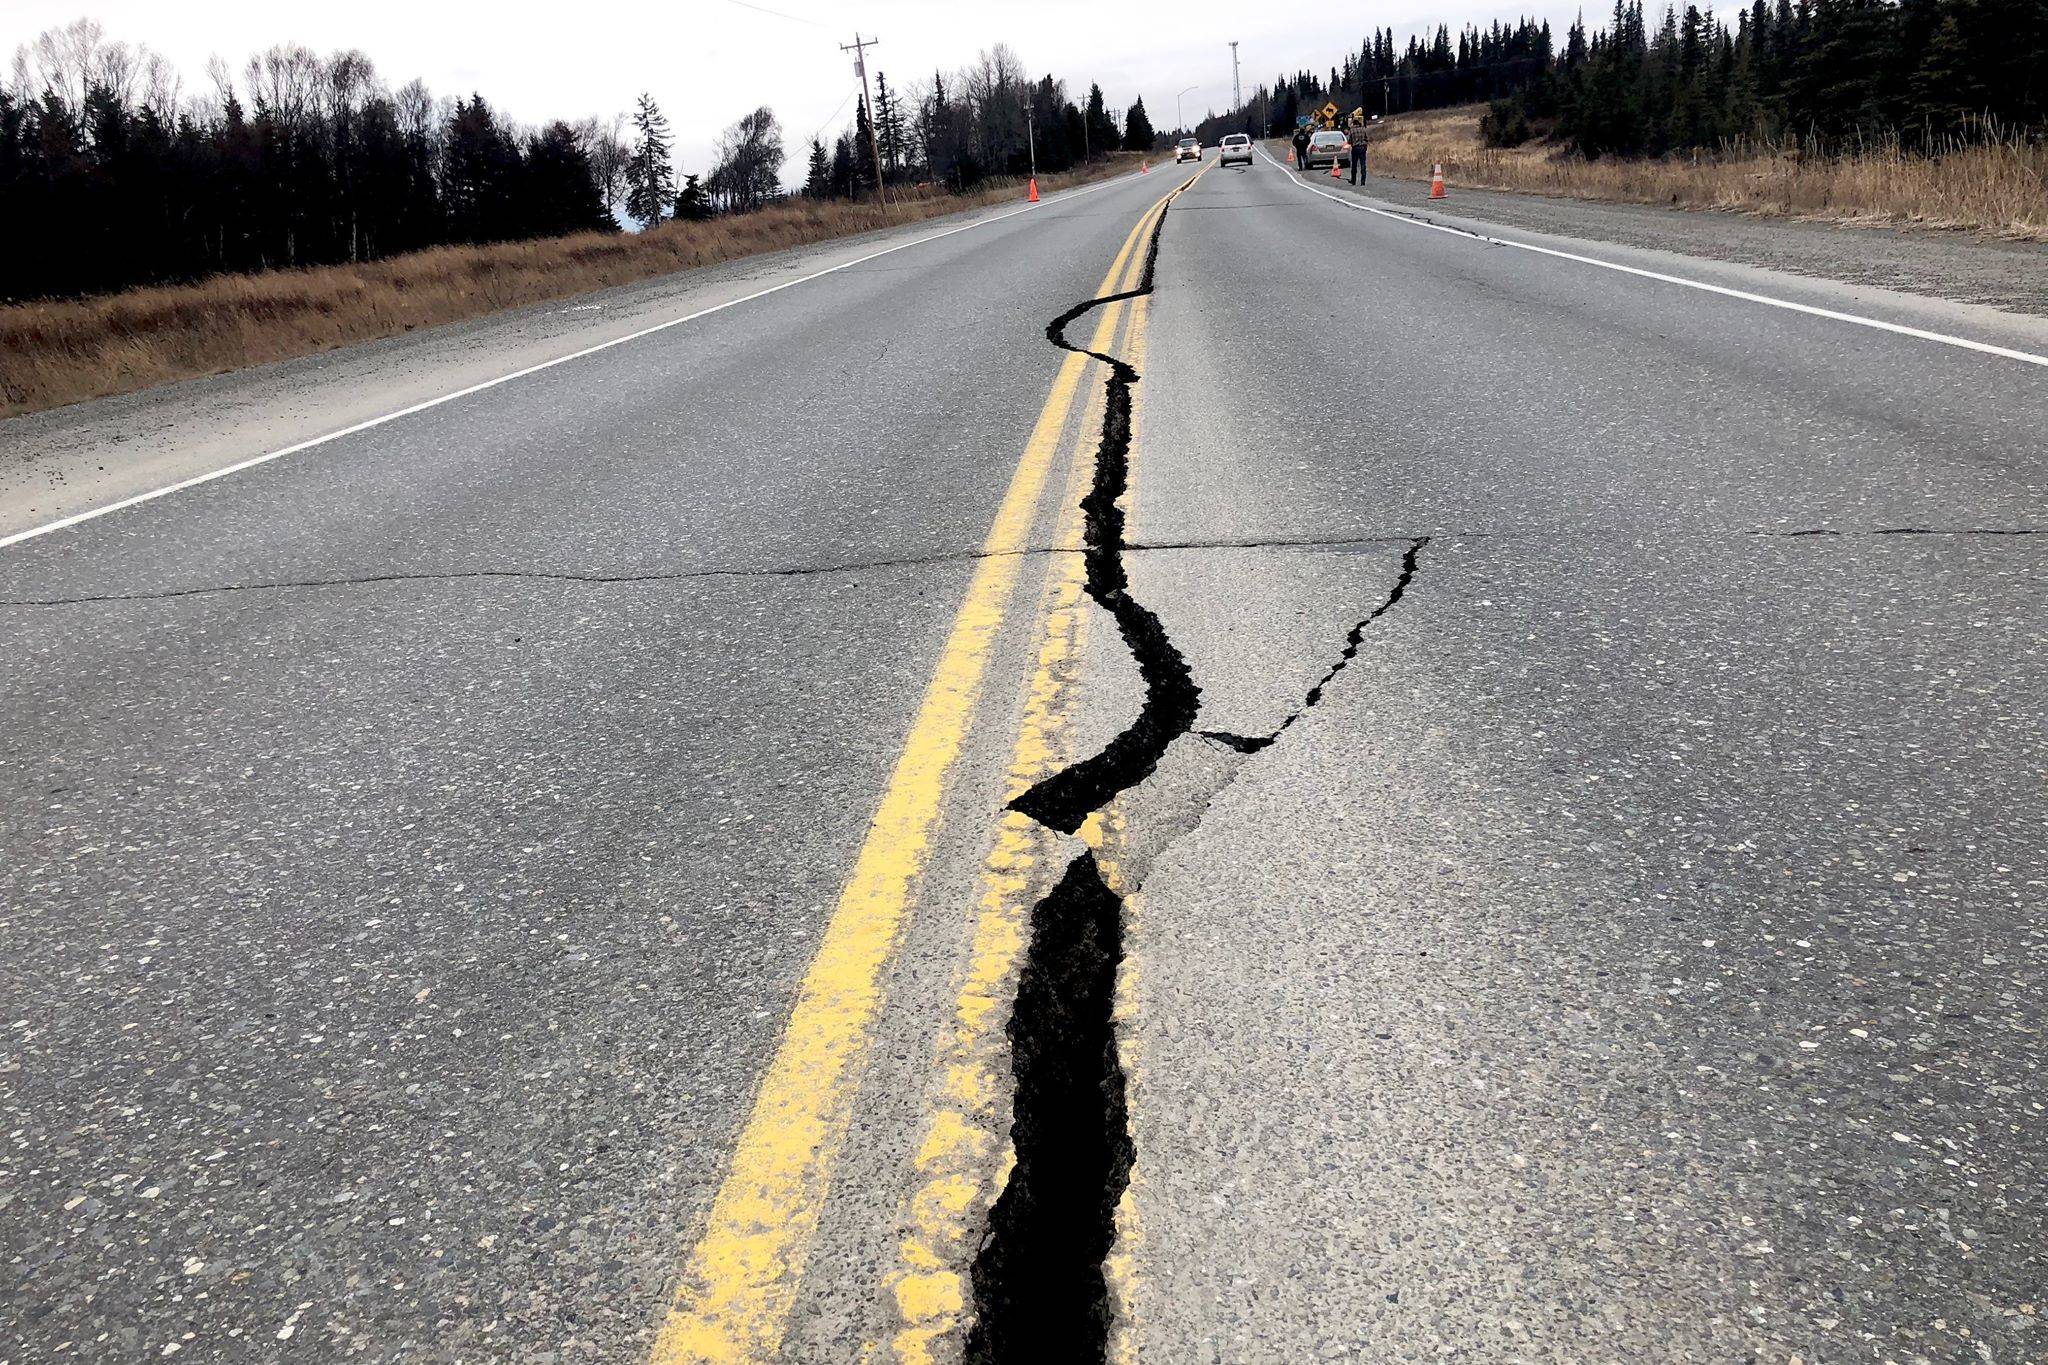 Cracks in the road at Mile 19 of the Kenai Spur Highway can be seen after the Nov. 30, 2018, earthquake. (Photo by Victoria Petersen/Peninsula Clarion)